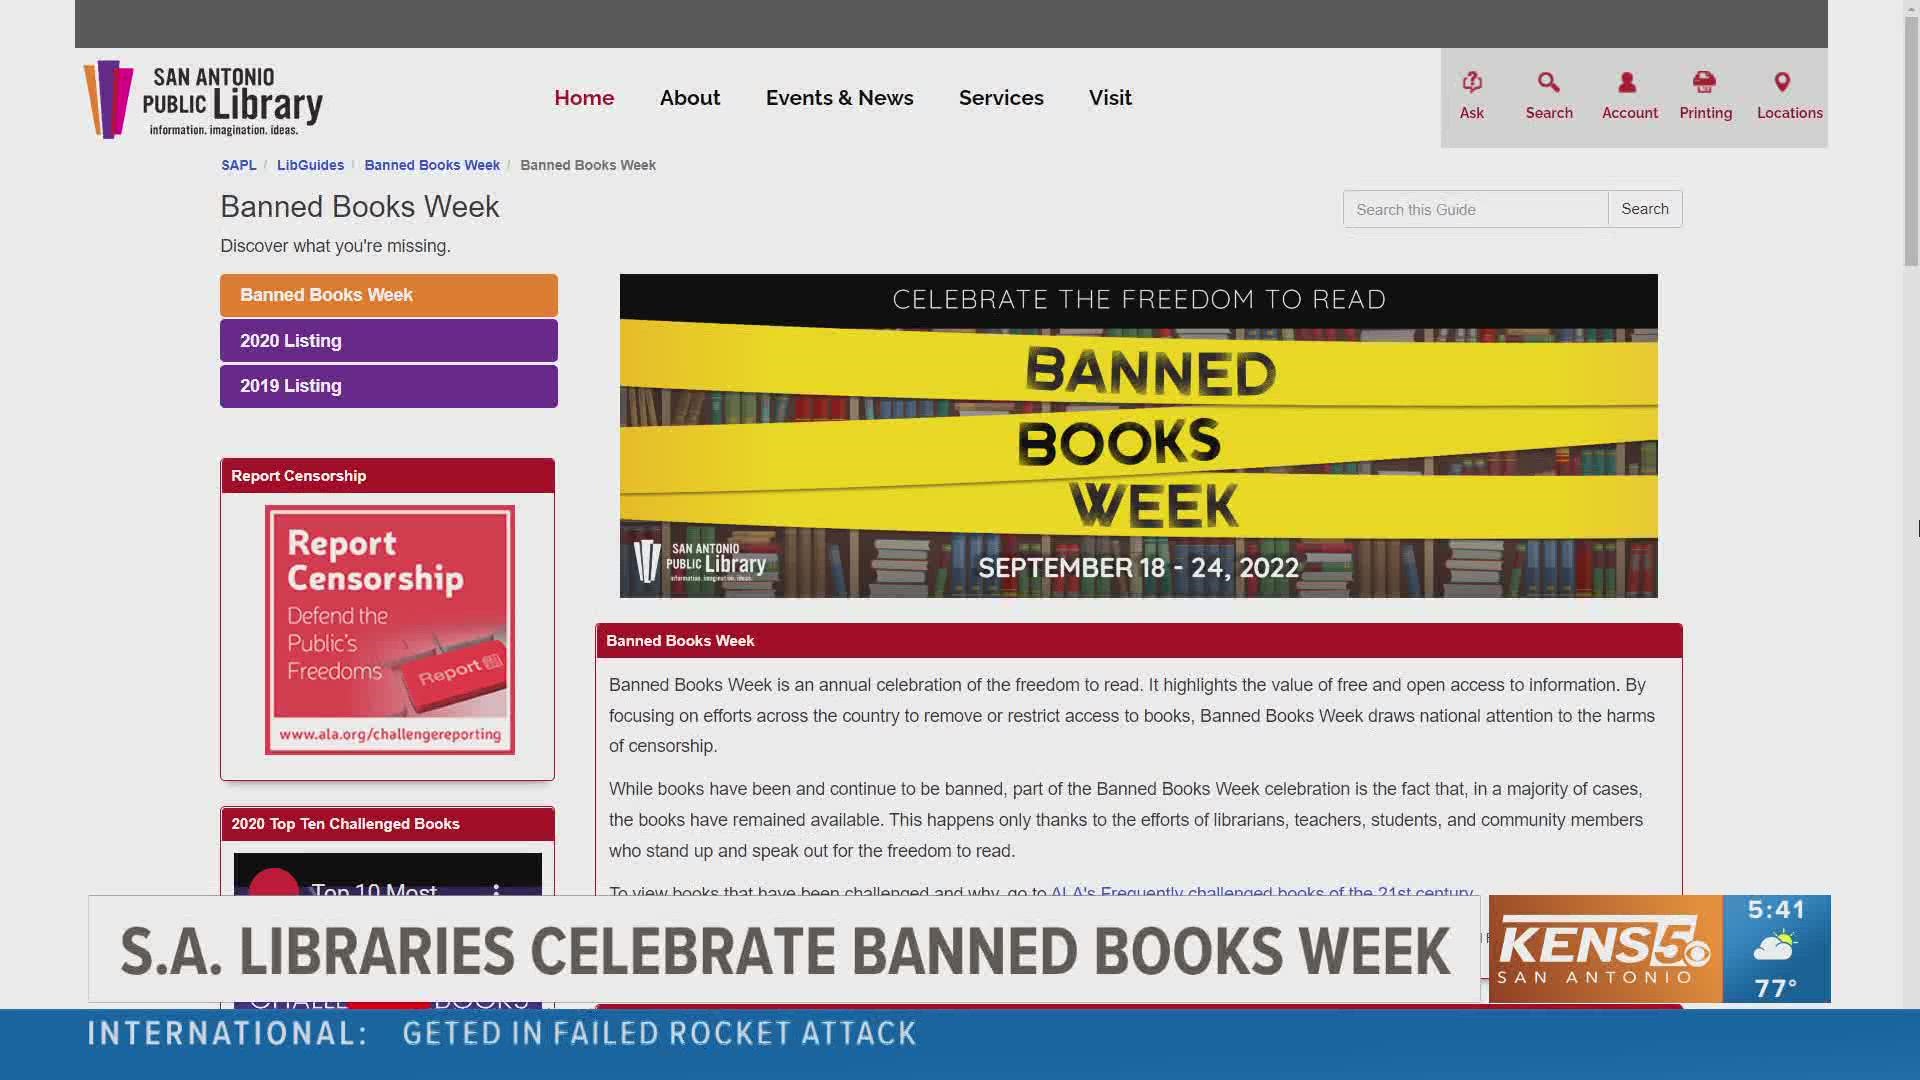 By focusing on efforts across the country to remove or restrict access to books, Banned Books Week draws national attention to the harms of censorship.